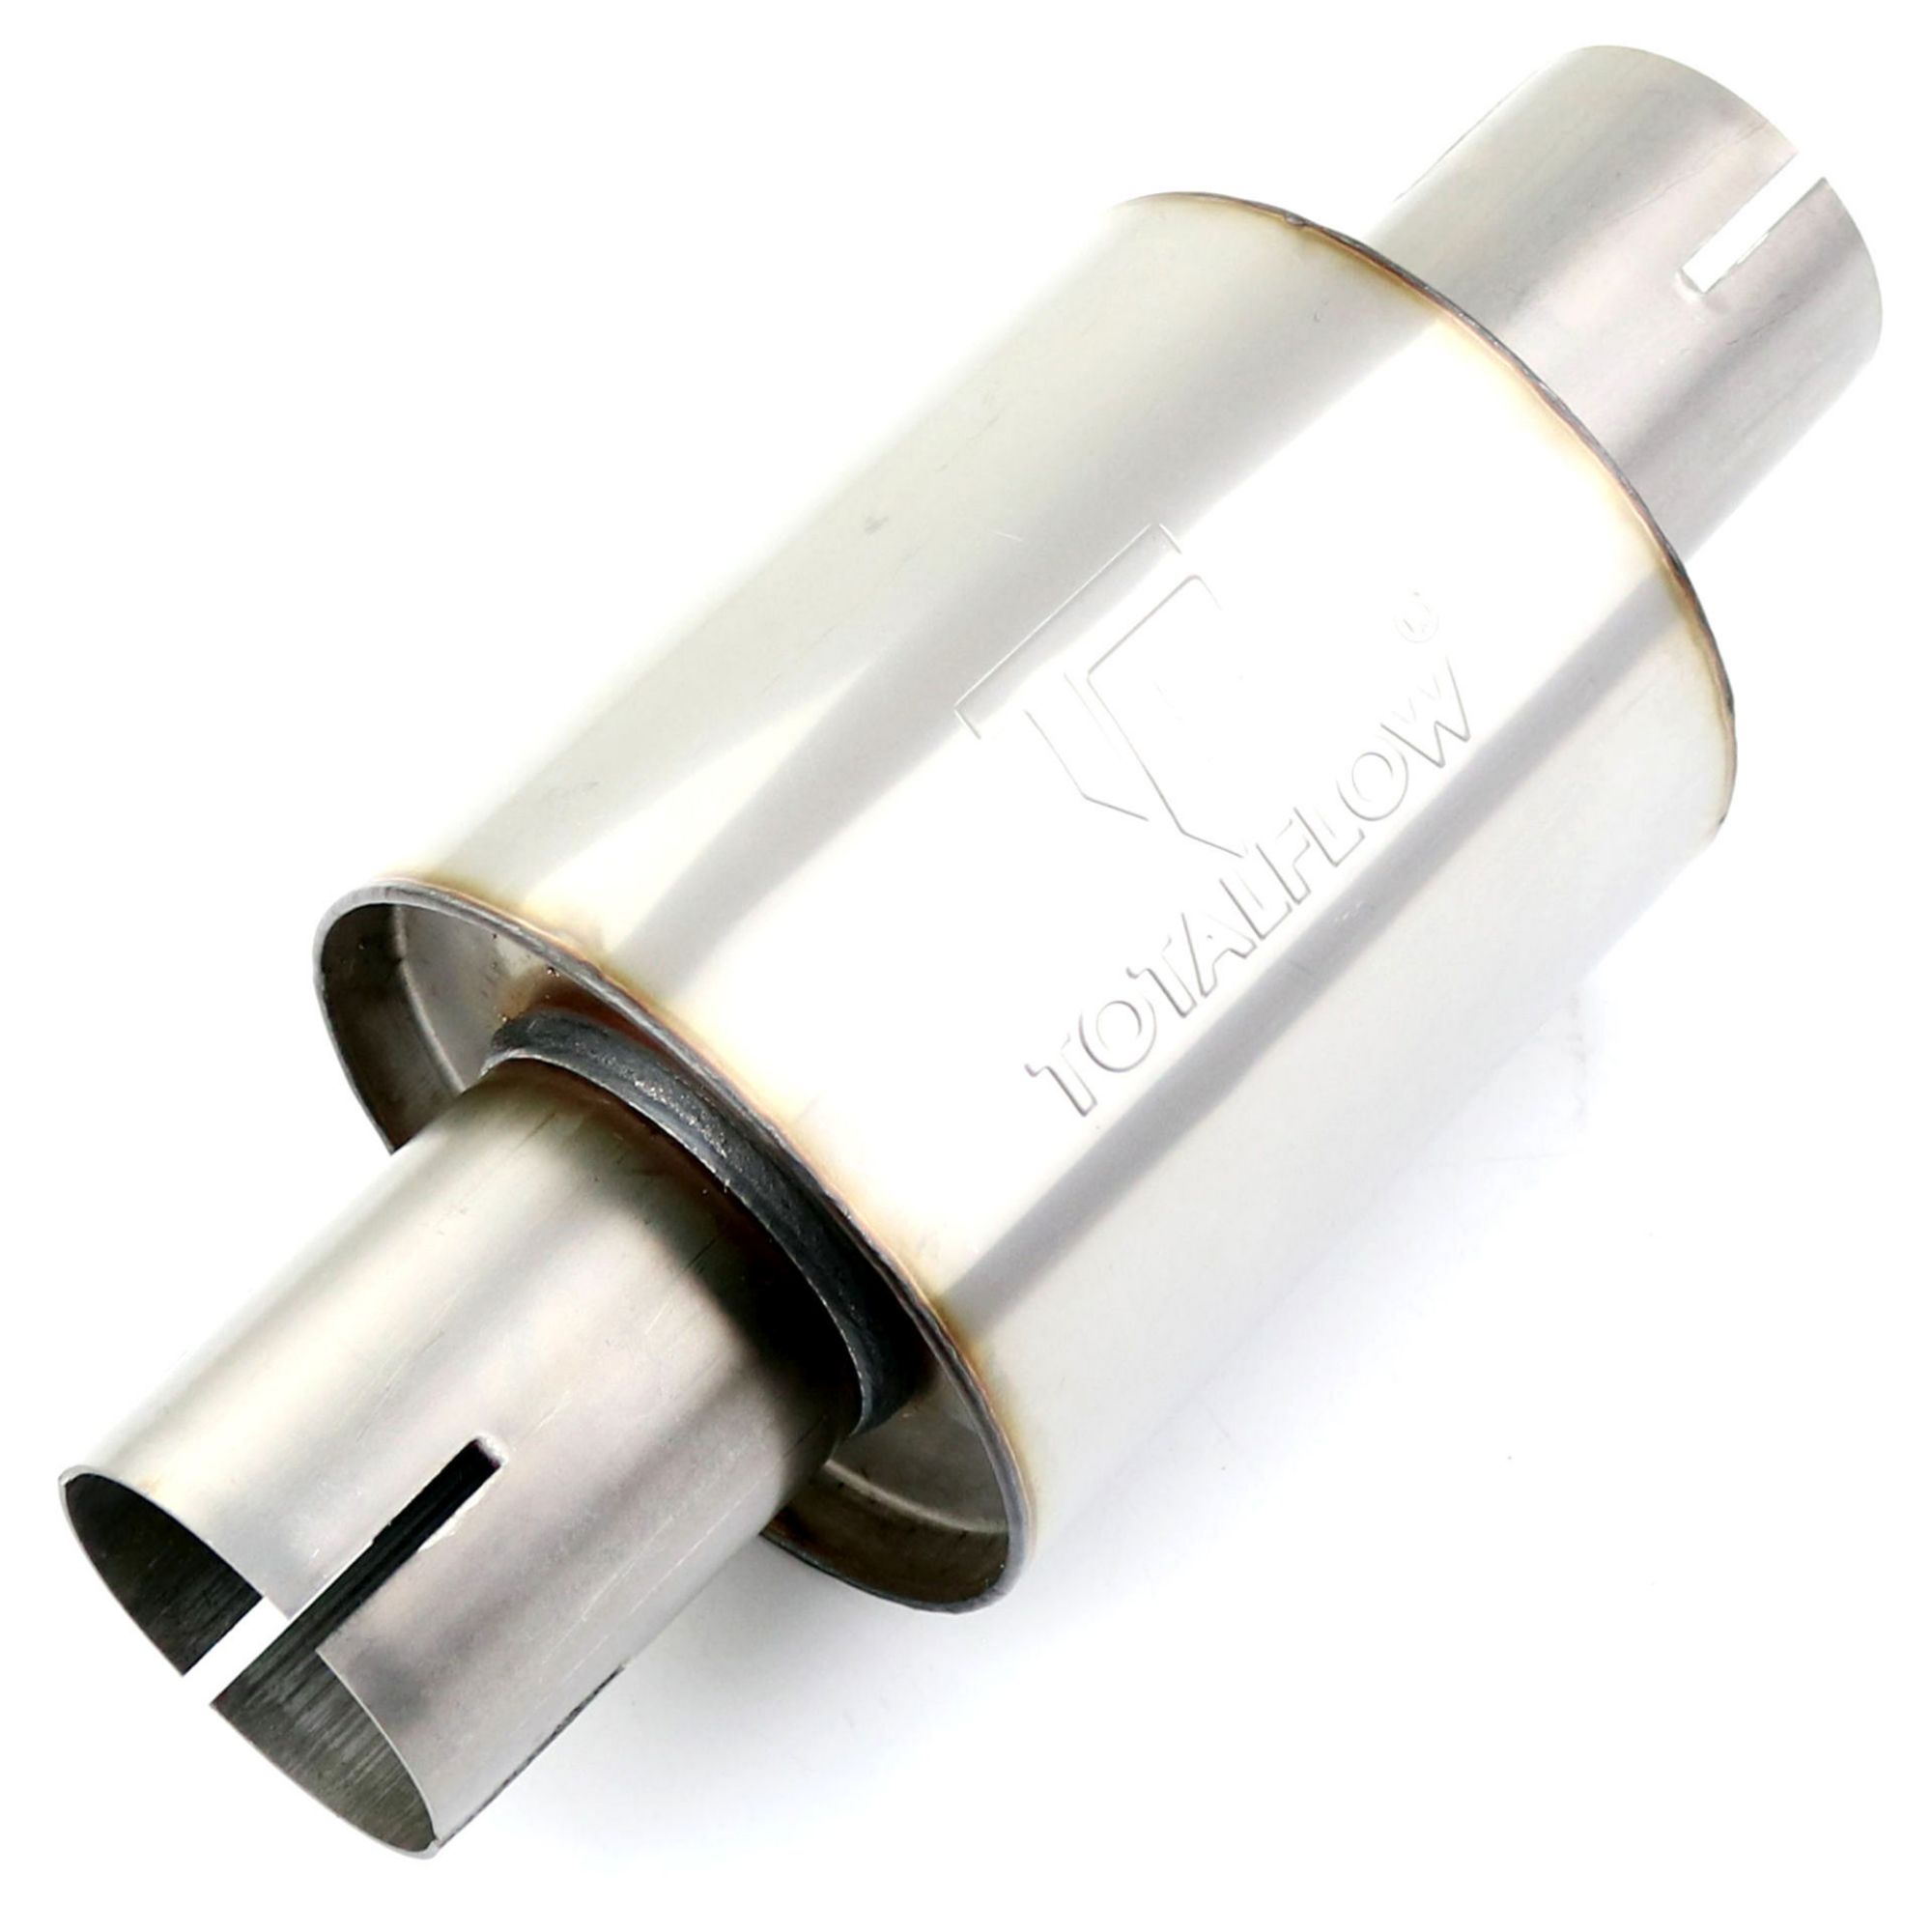 TOTALFLOW 22316S Straight Through Universal 2-1/2" Inch Slotted Ends Exhaust Muffler - 2.5 Inch ID